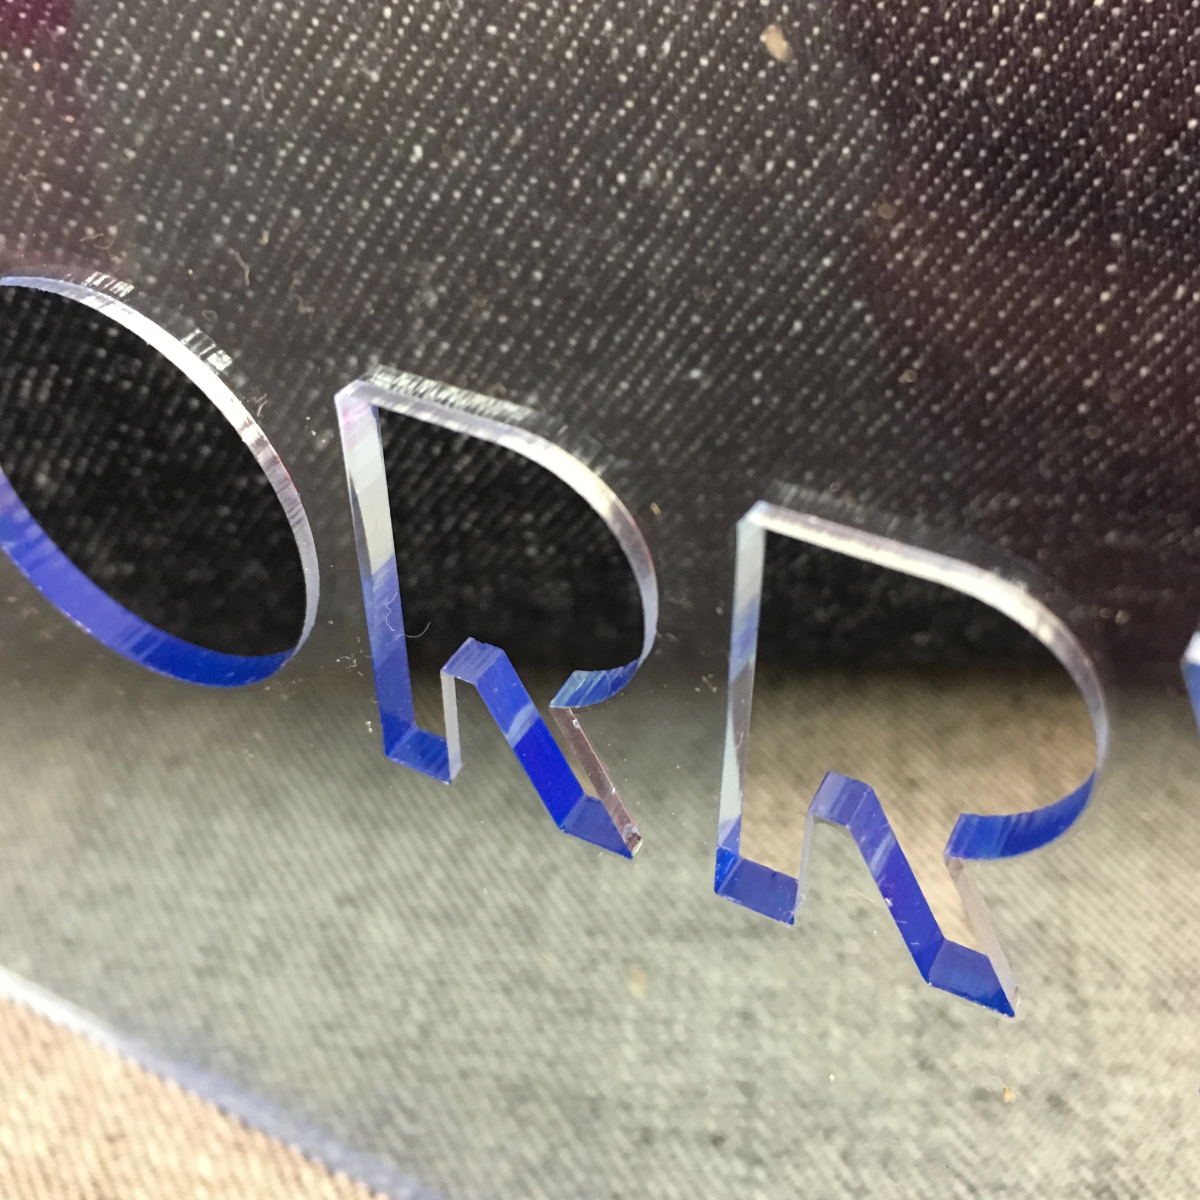 Sorry Neon Greeting Card displayed with its stencil reflecting behind.